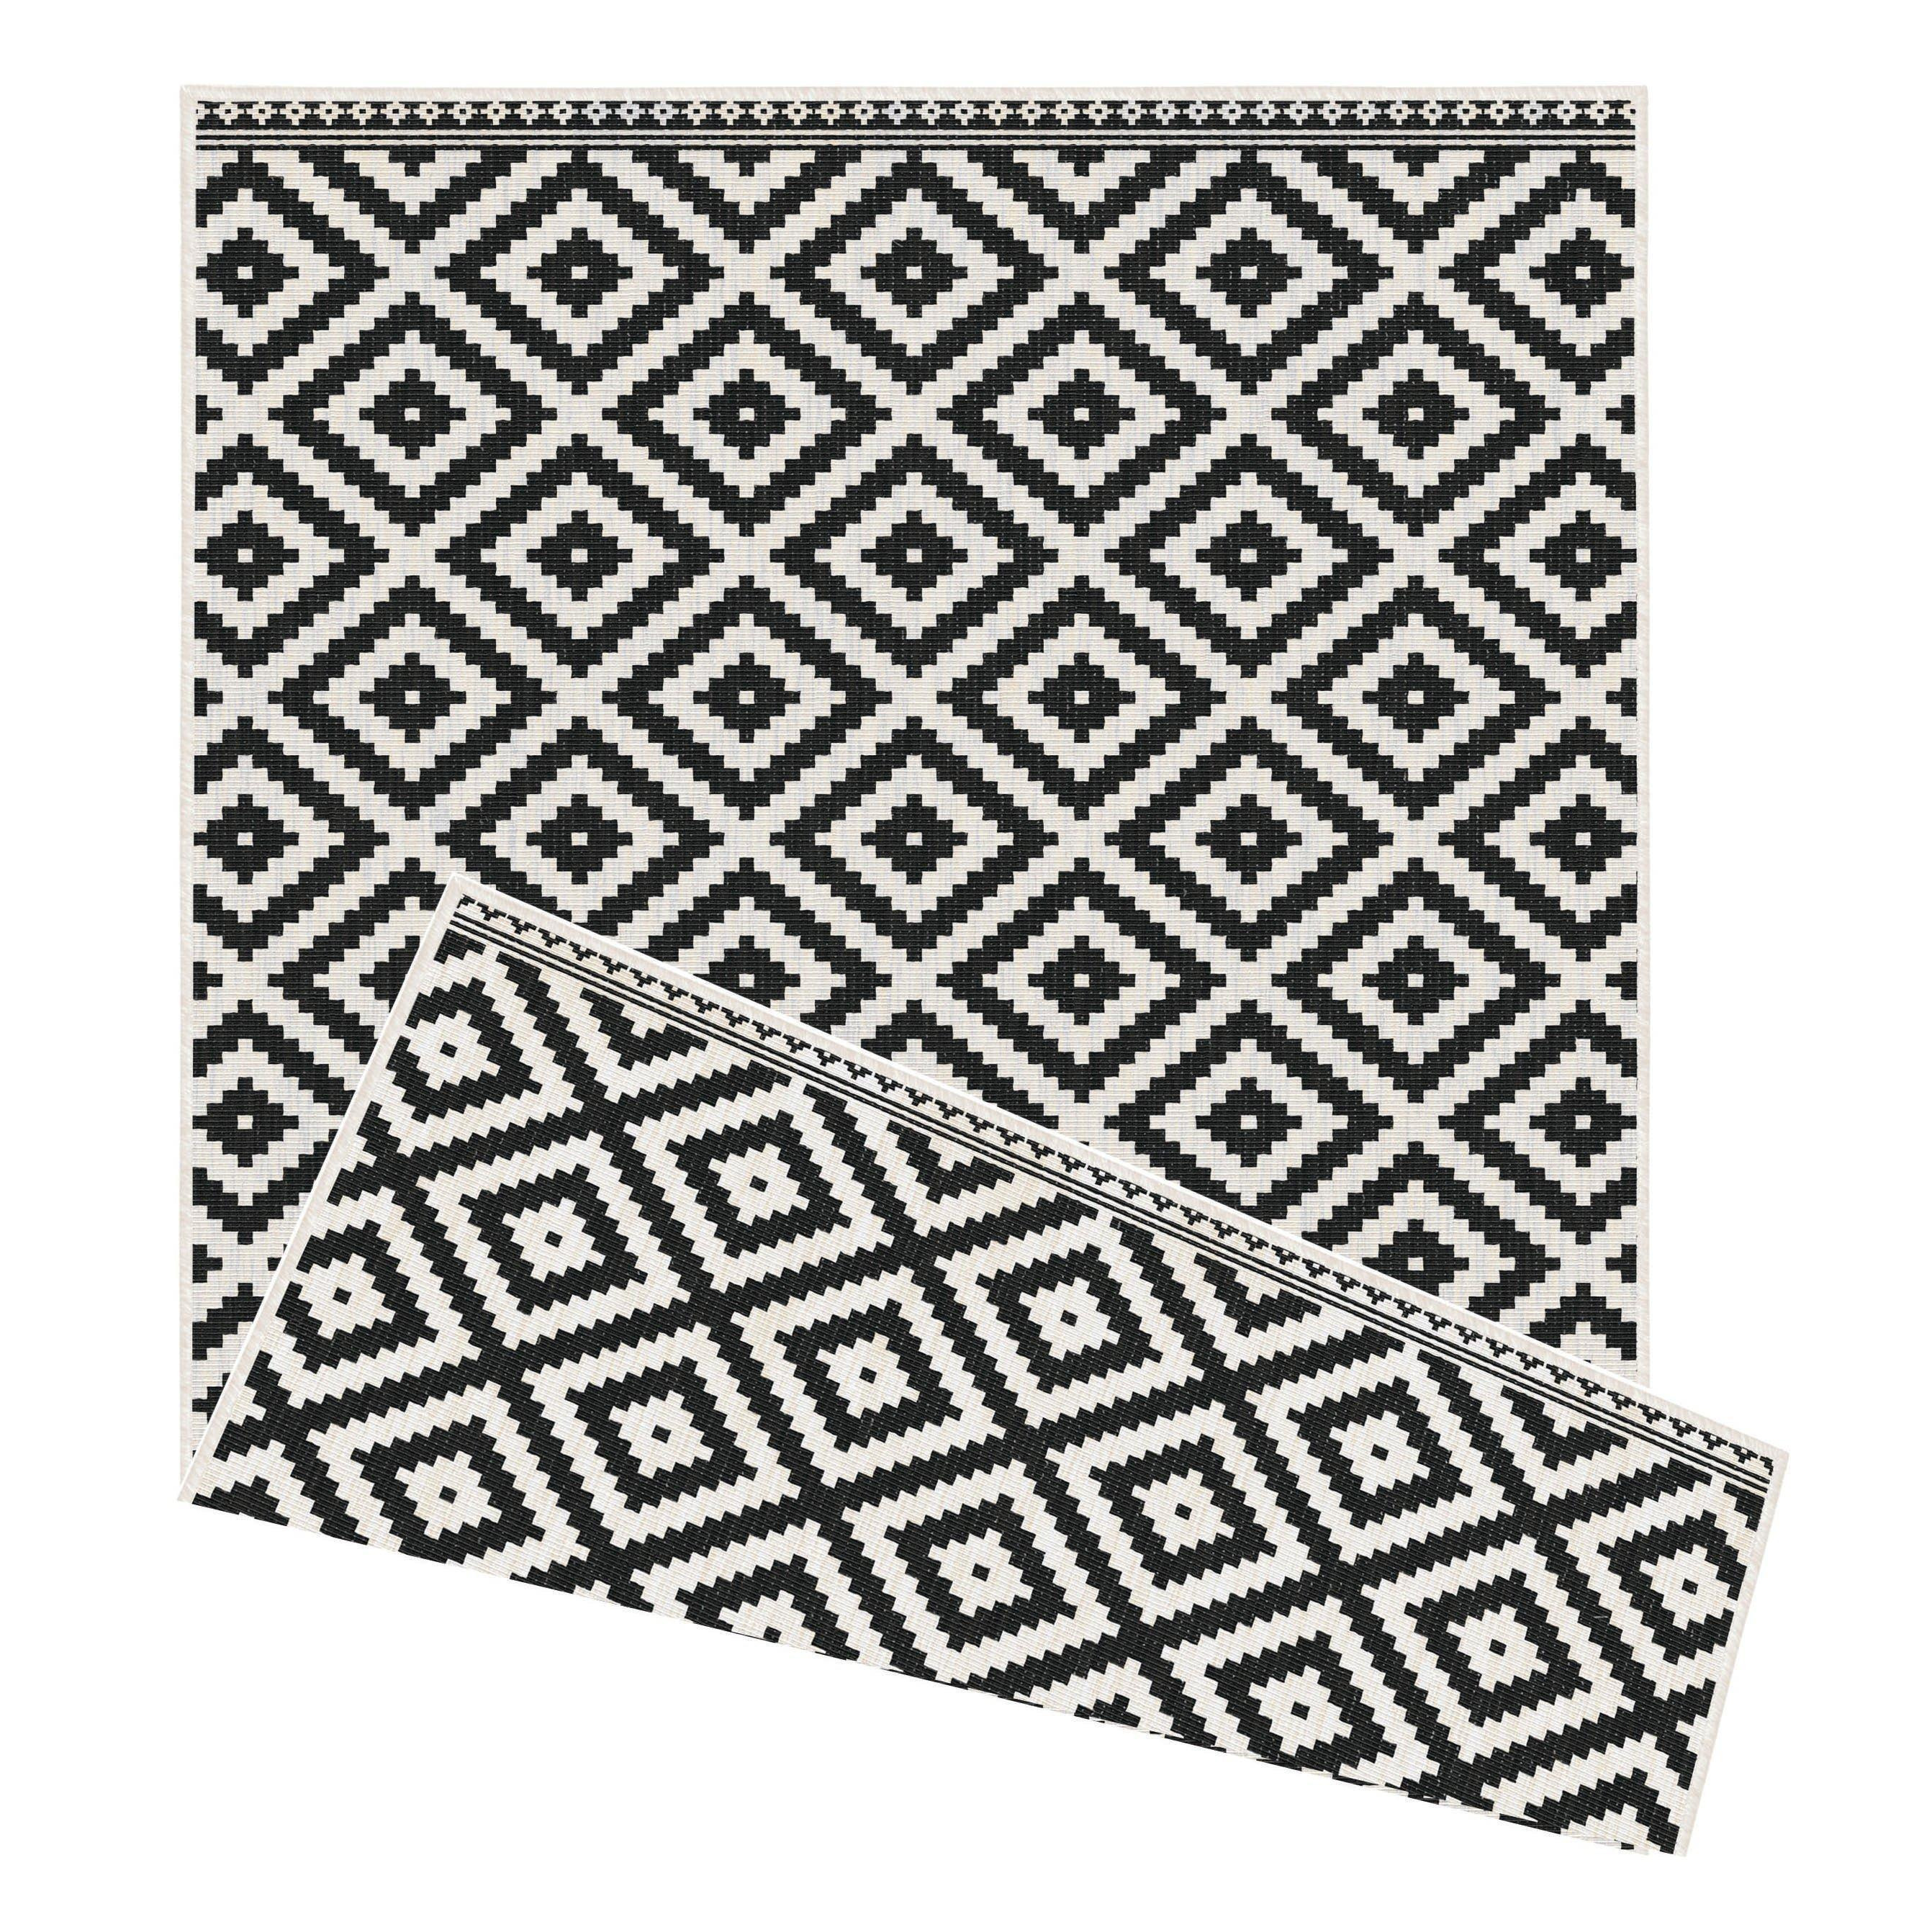 Duo Weave Collection Outdoor Rugs in Geometric Diamond Design - image 1